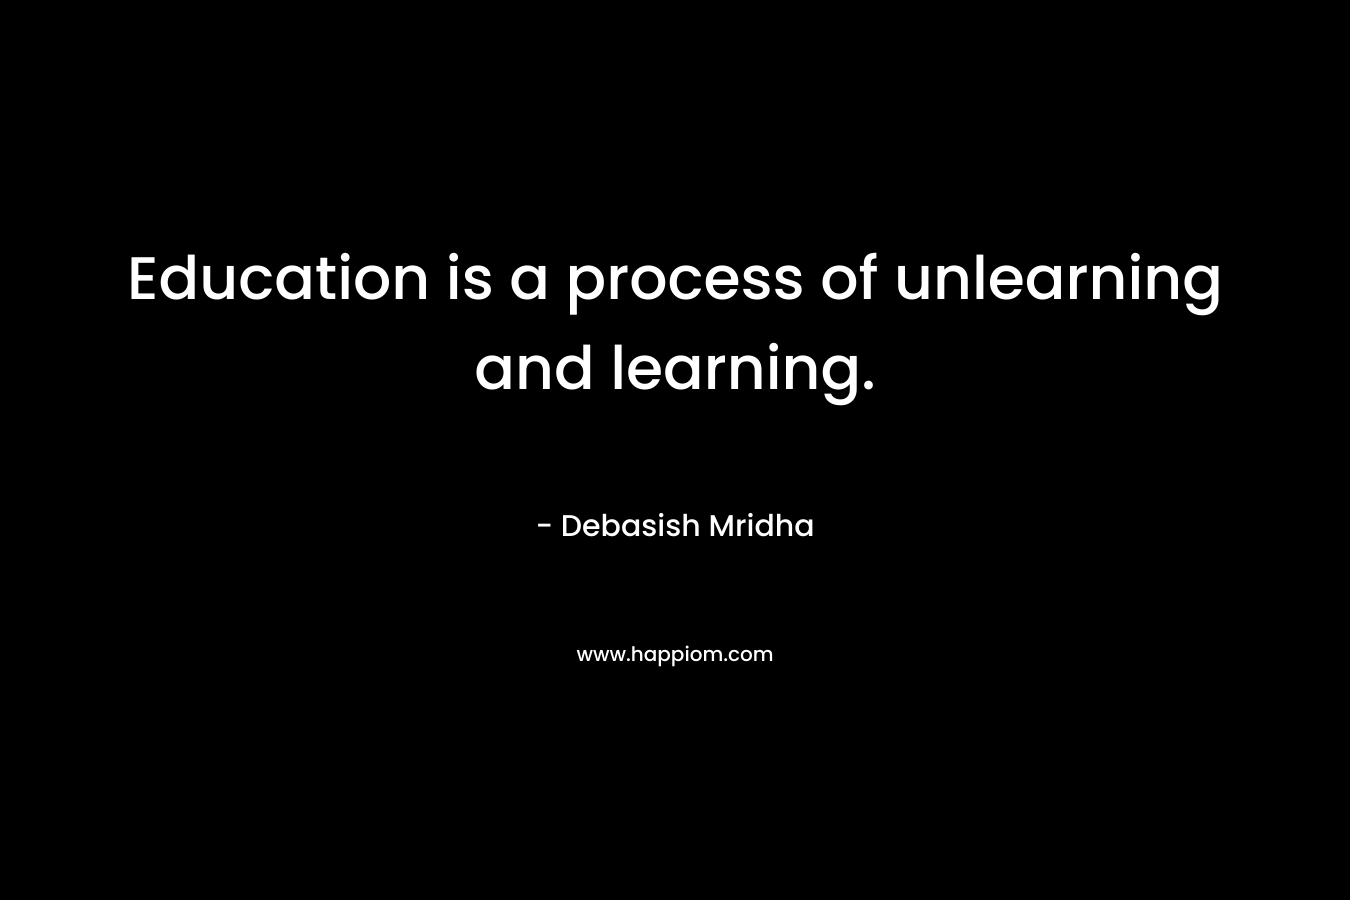 Education is a process of unlearning and learning. – Debasish Mridha